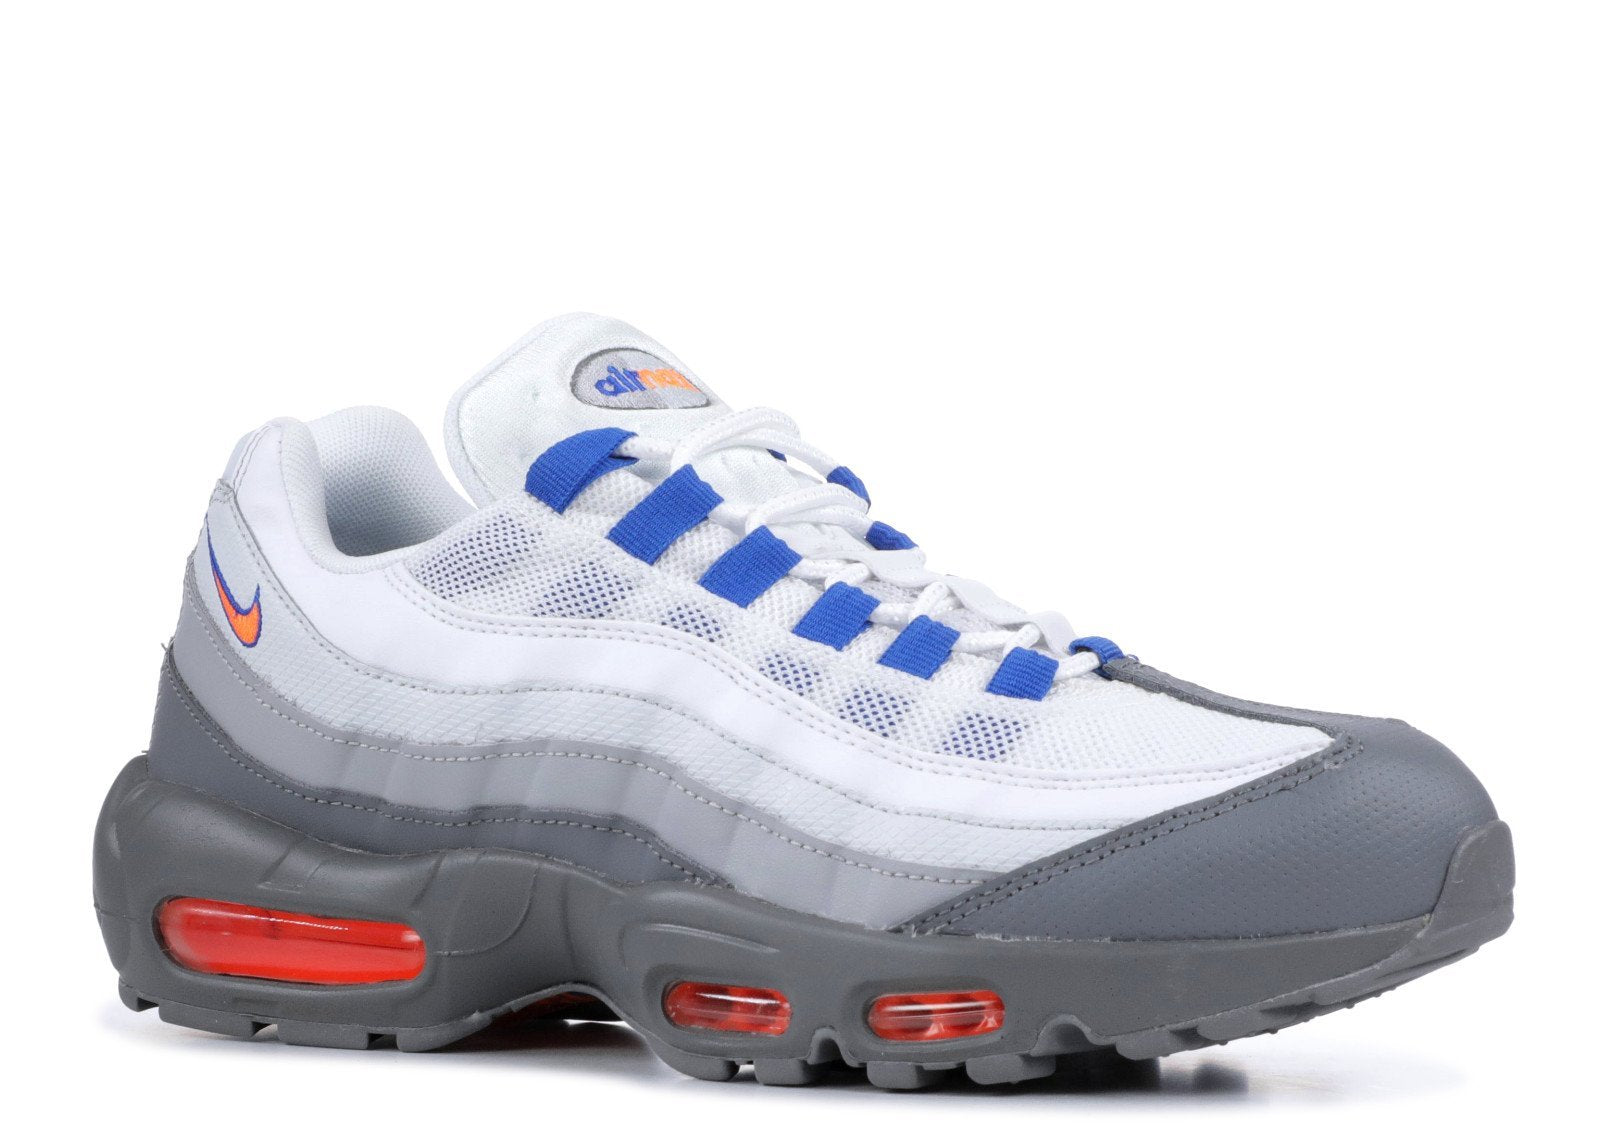 AIR MAX 95 ESSENTIAL "METS" – UNDEFEATED